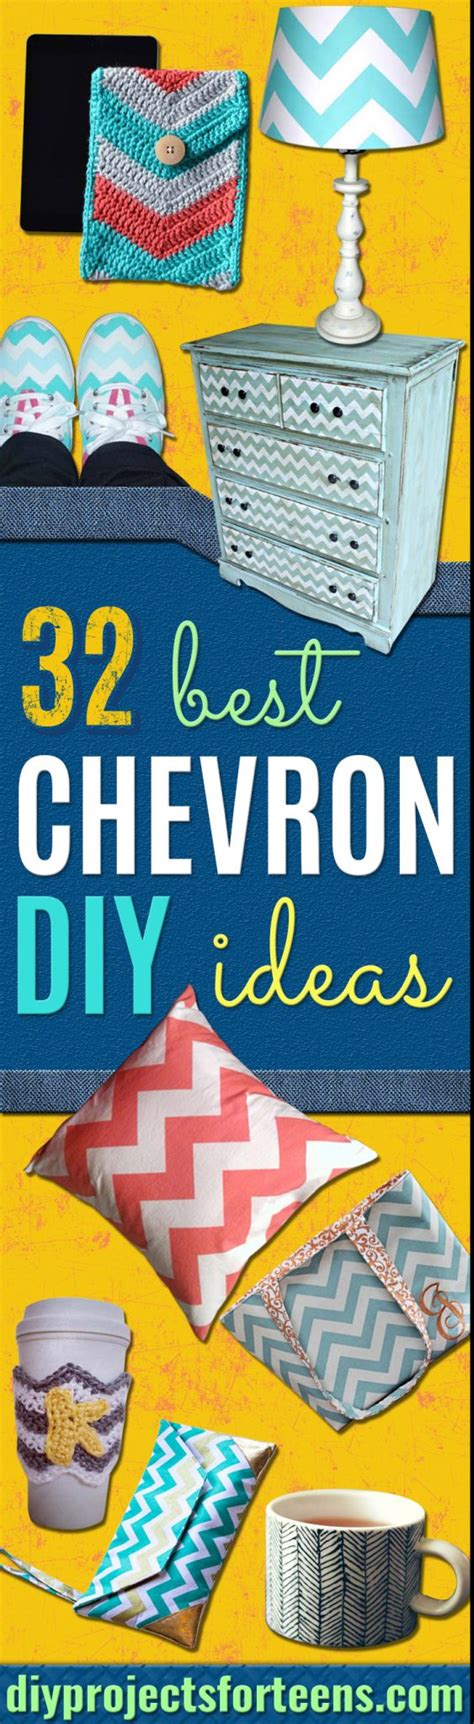 Best Chevron Diy Project Ideas Diy Projects For Teens